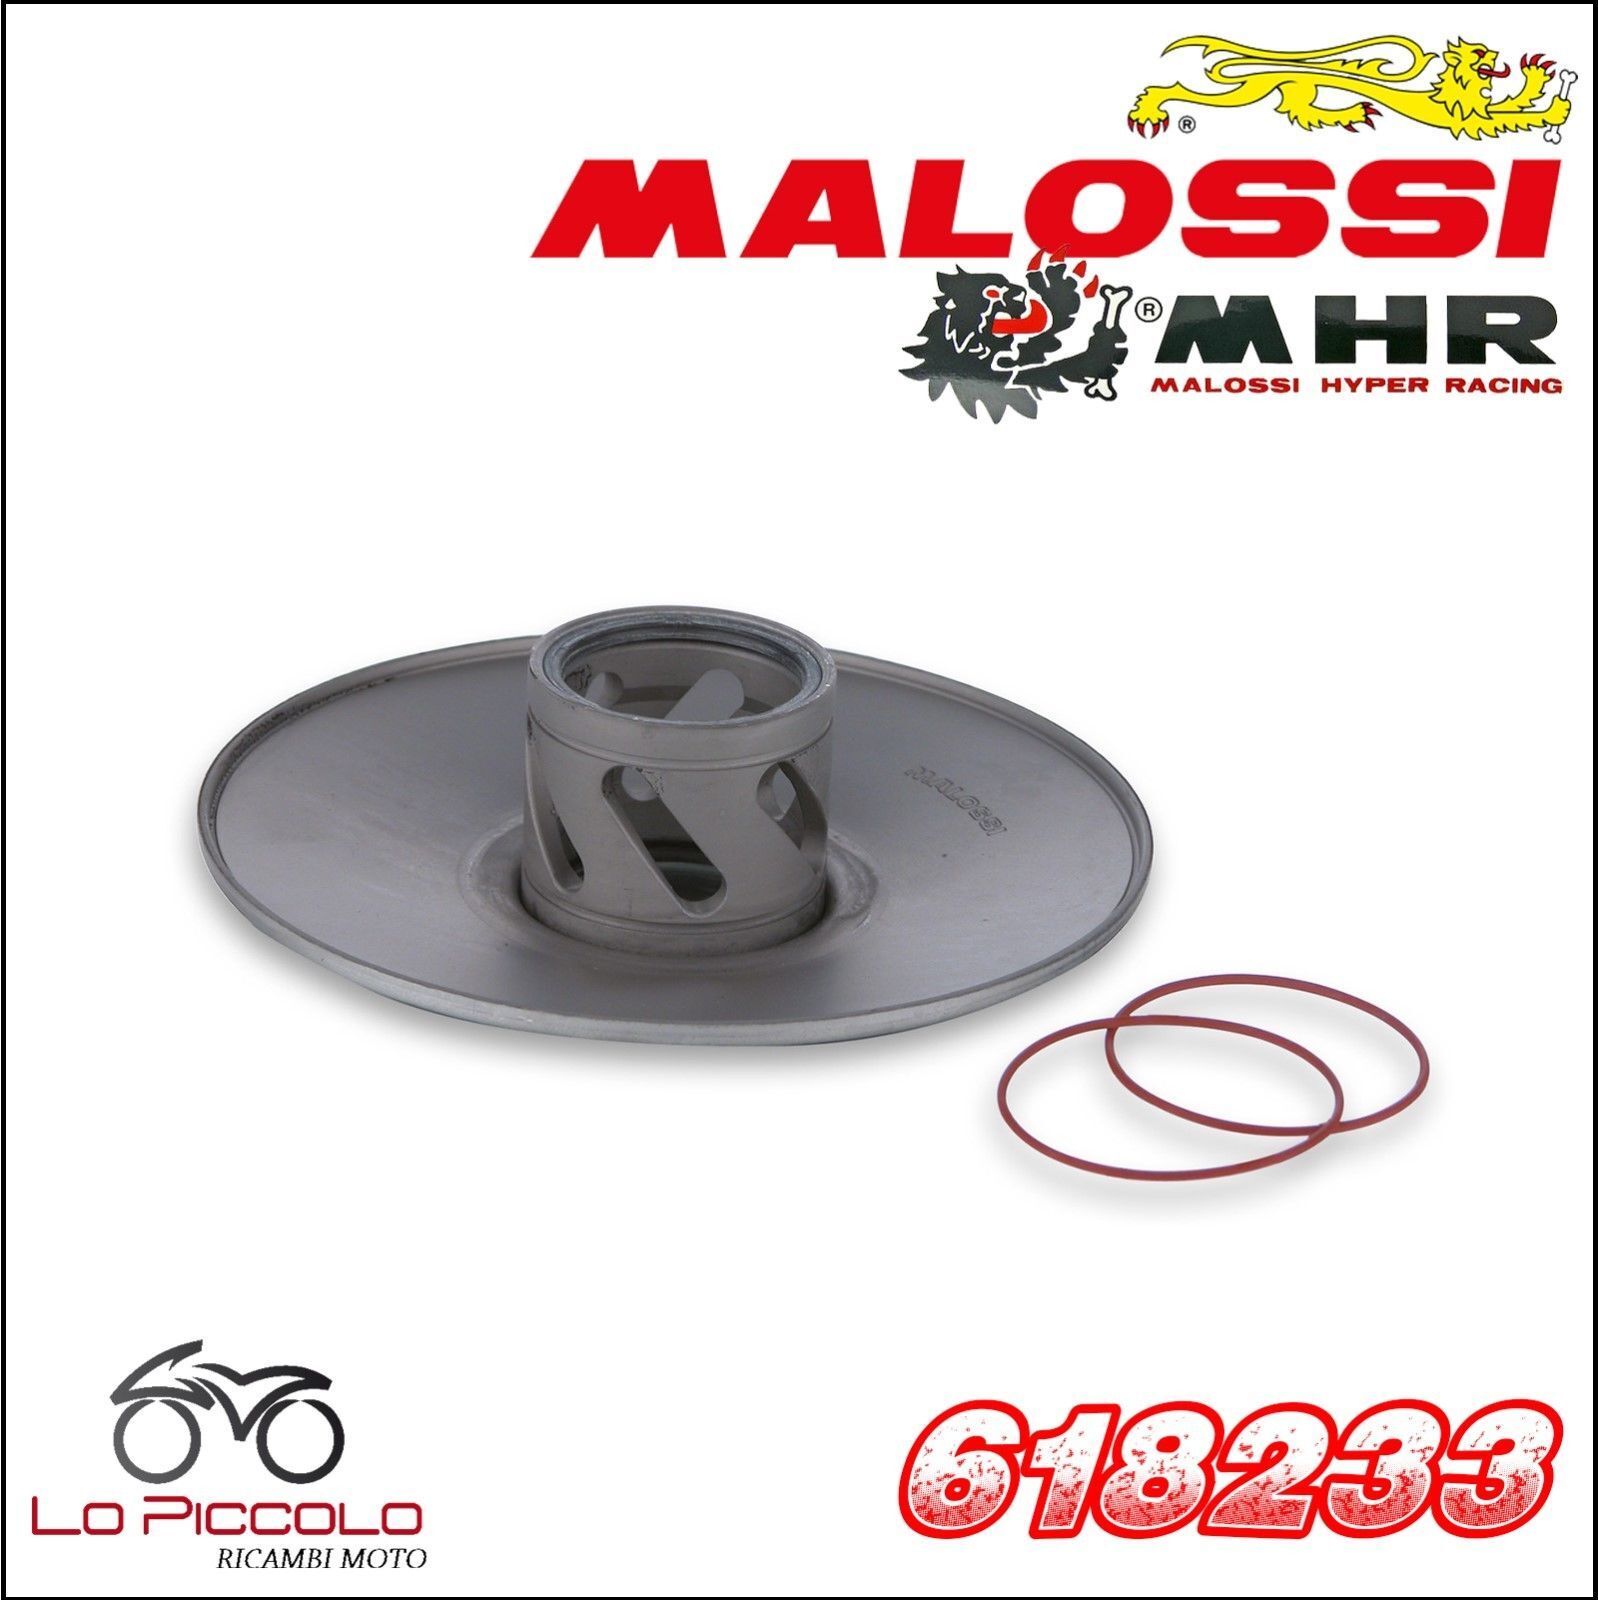 618233 malossi torque Popular driver corrector gilera 5 easy pair moving Popular shop is the lowest price challenge